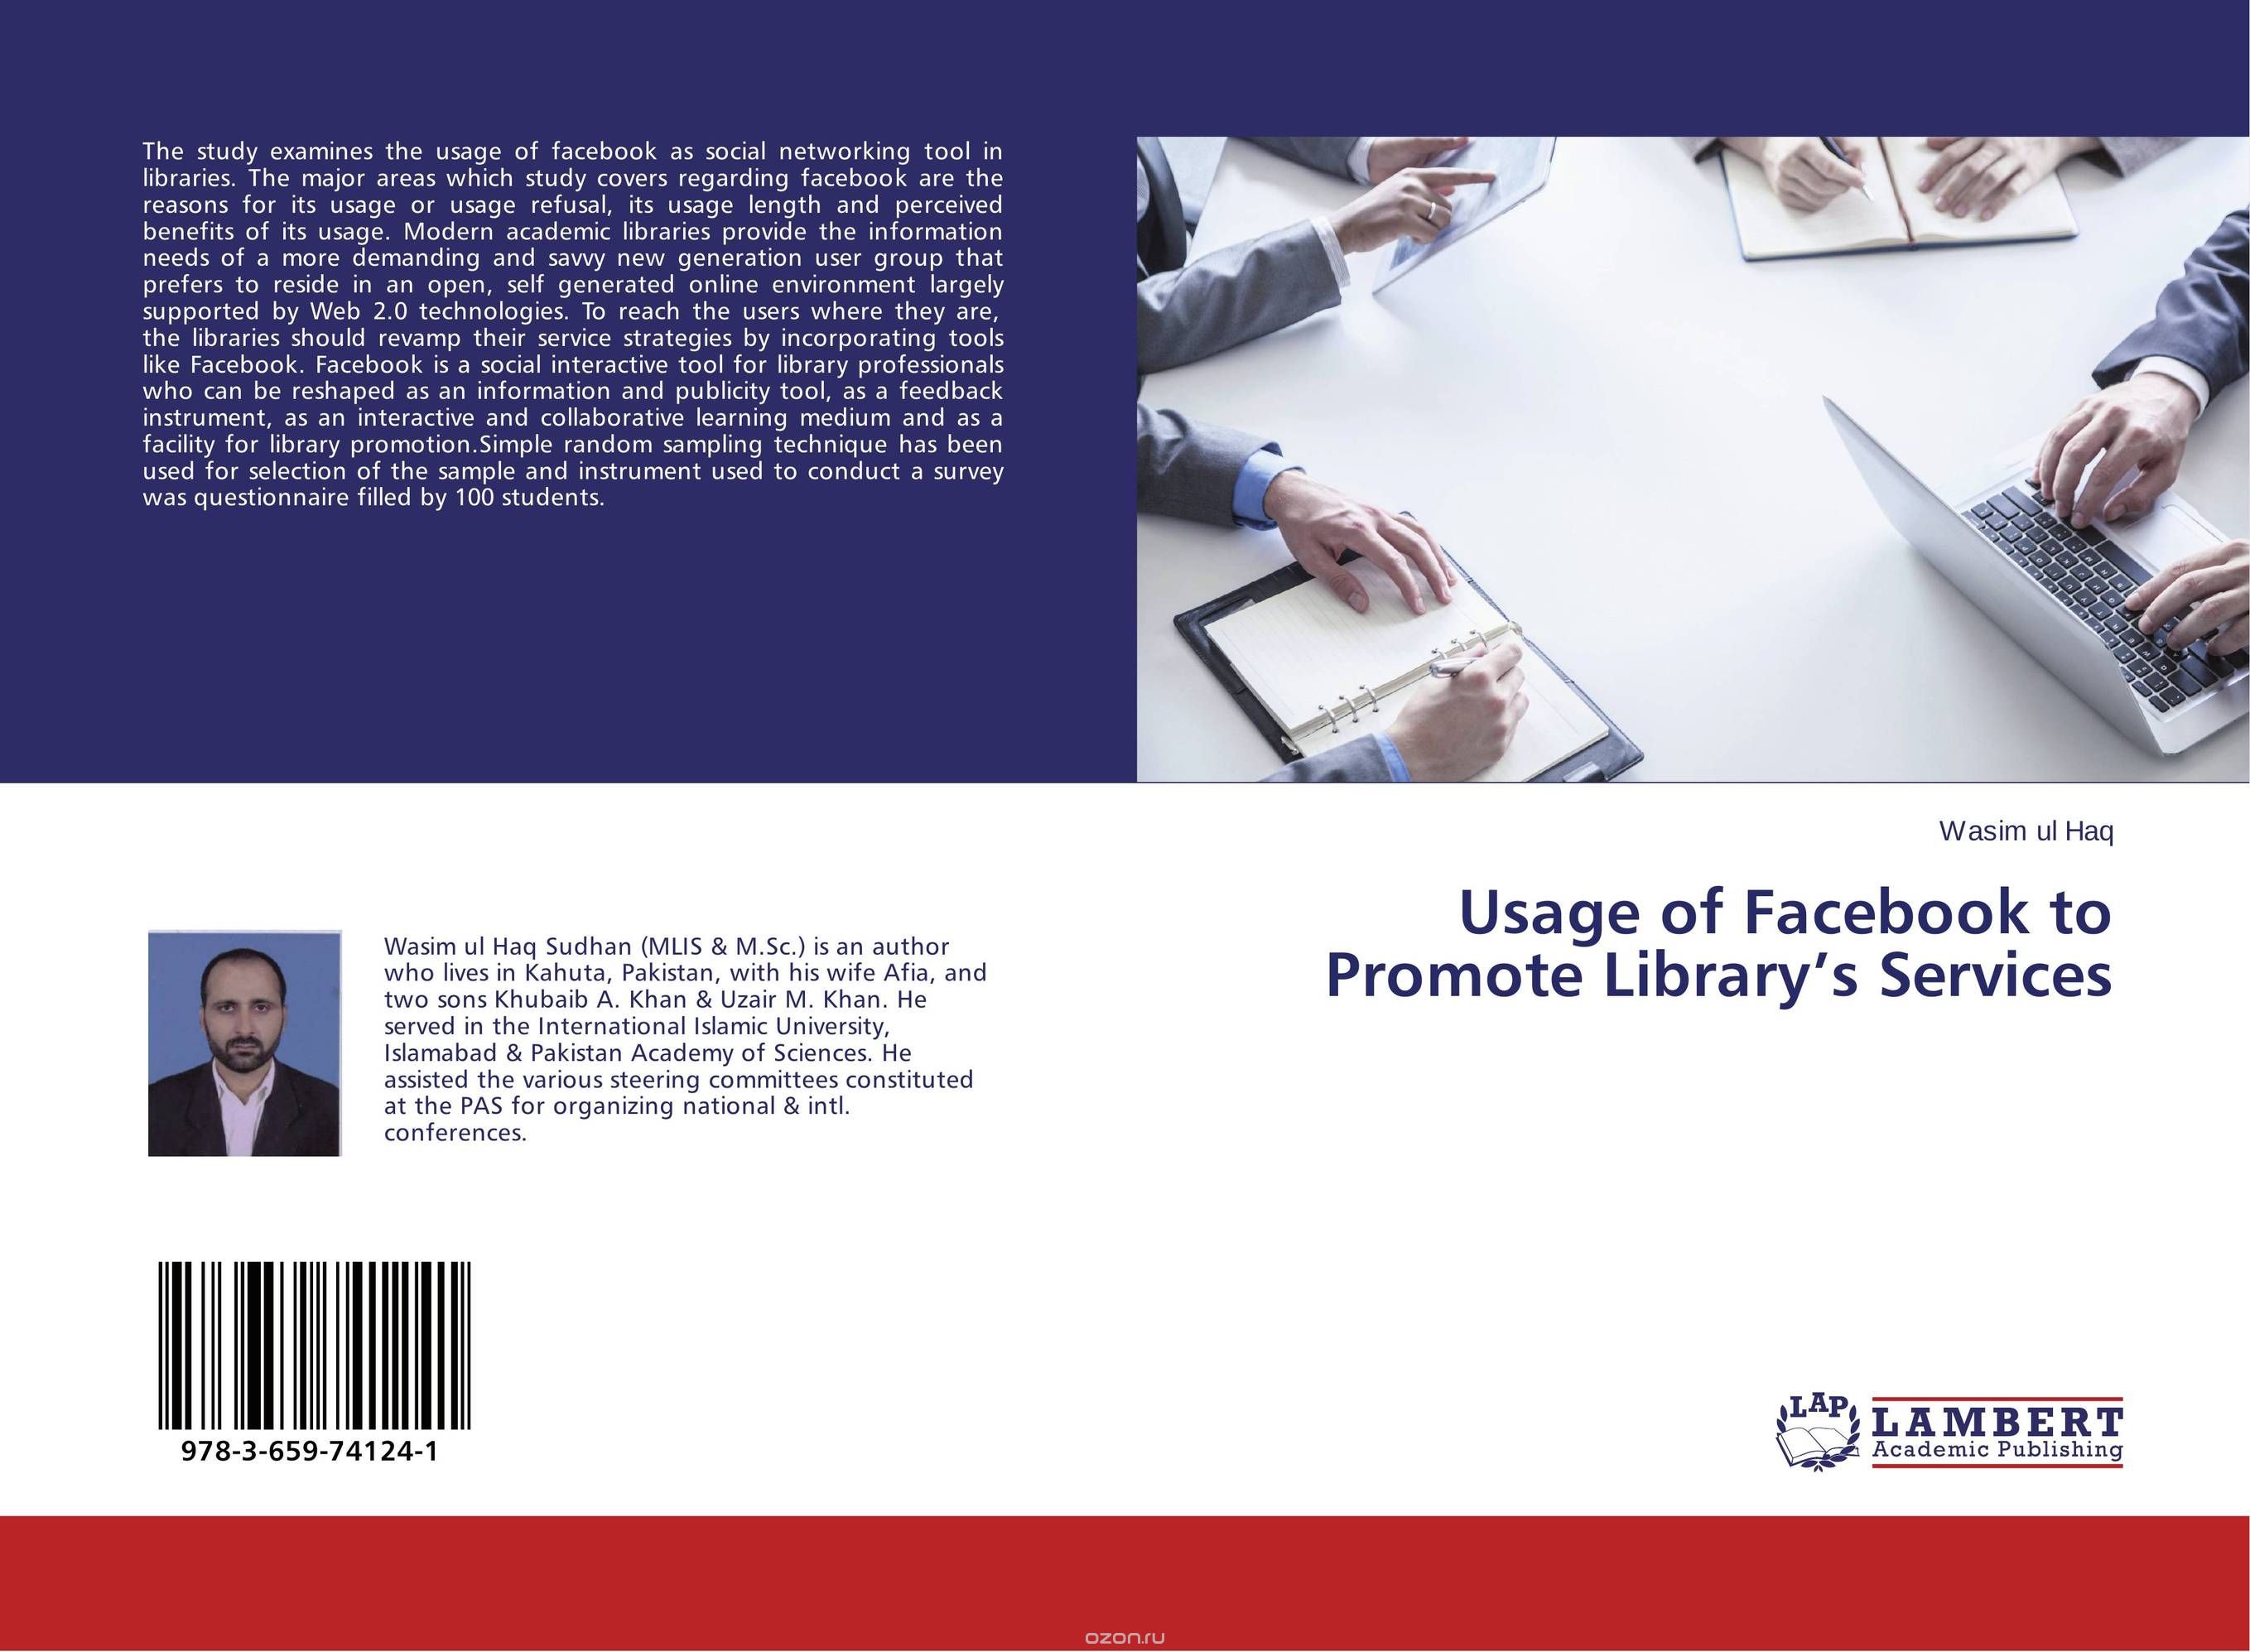 Скачать книгу "Usage of Facebook to Promote Library’s Services"